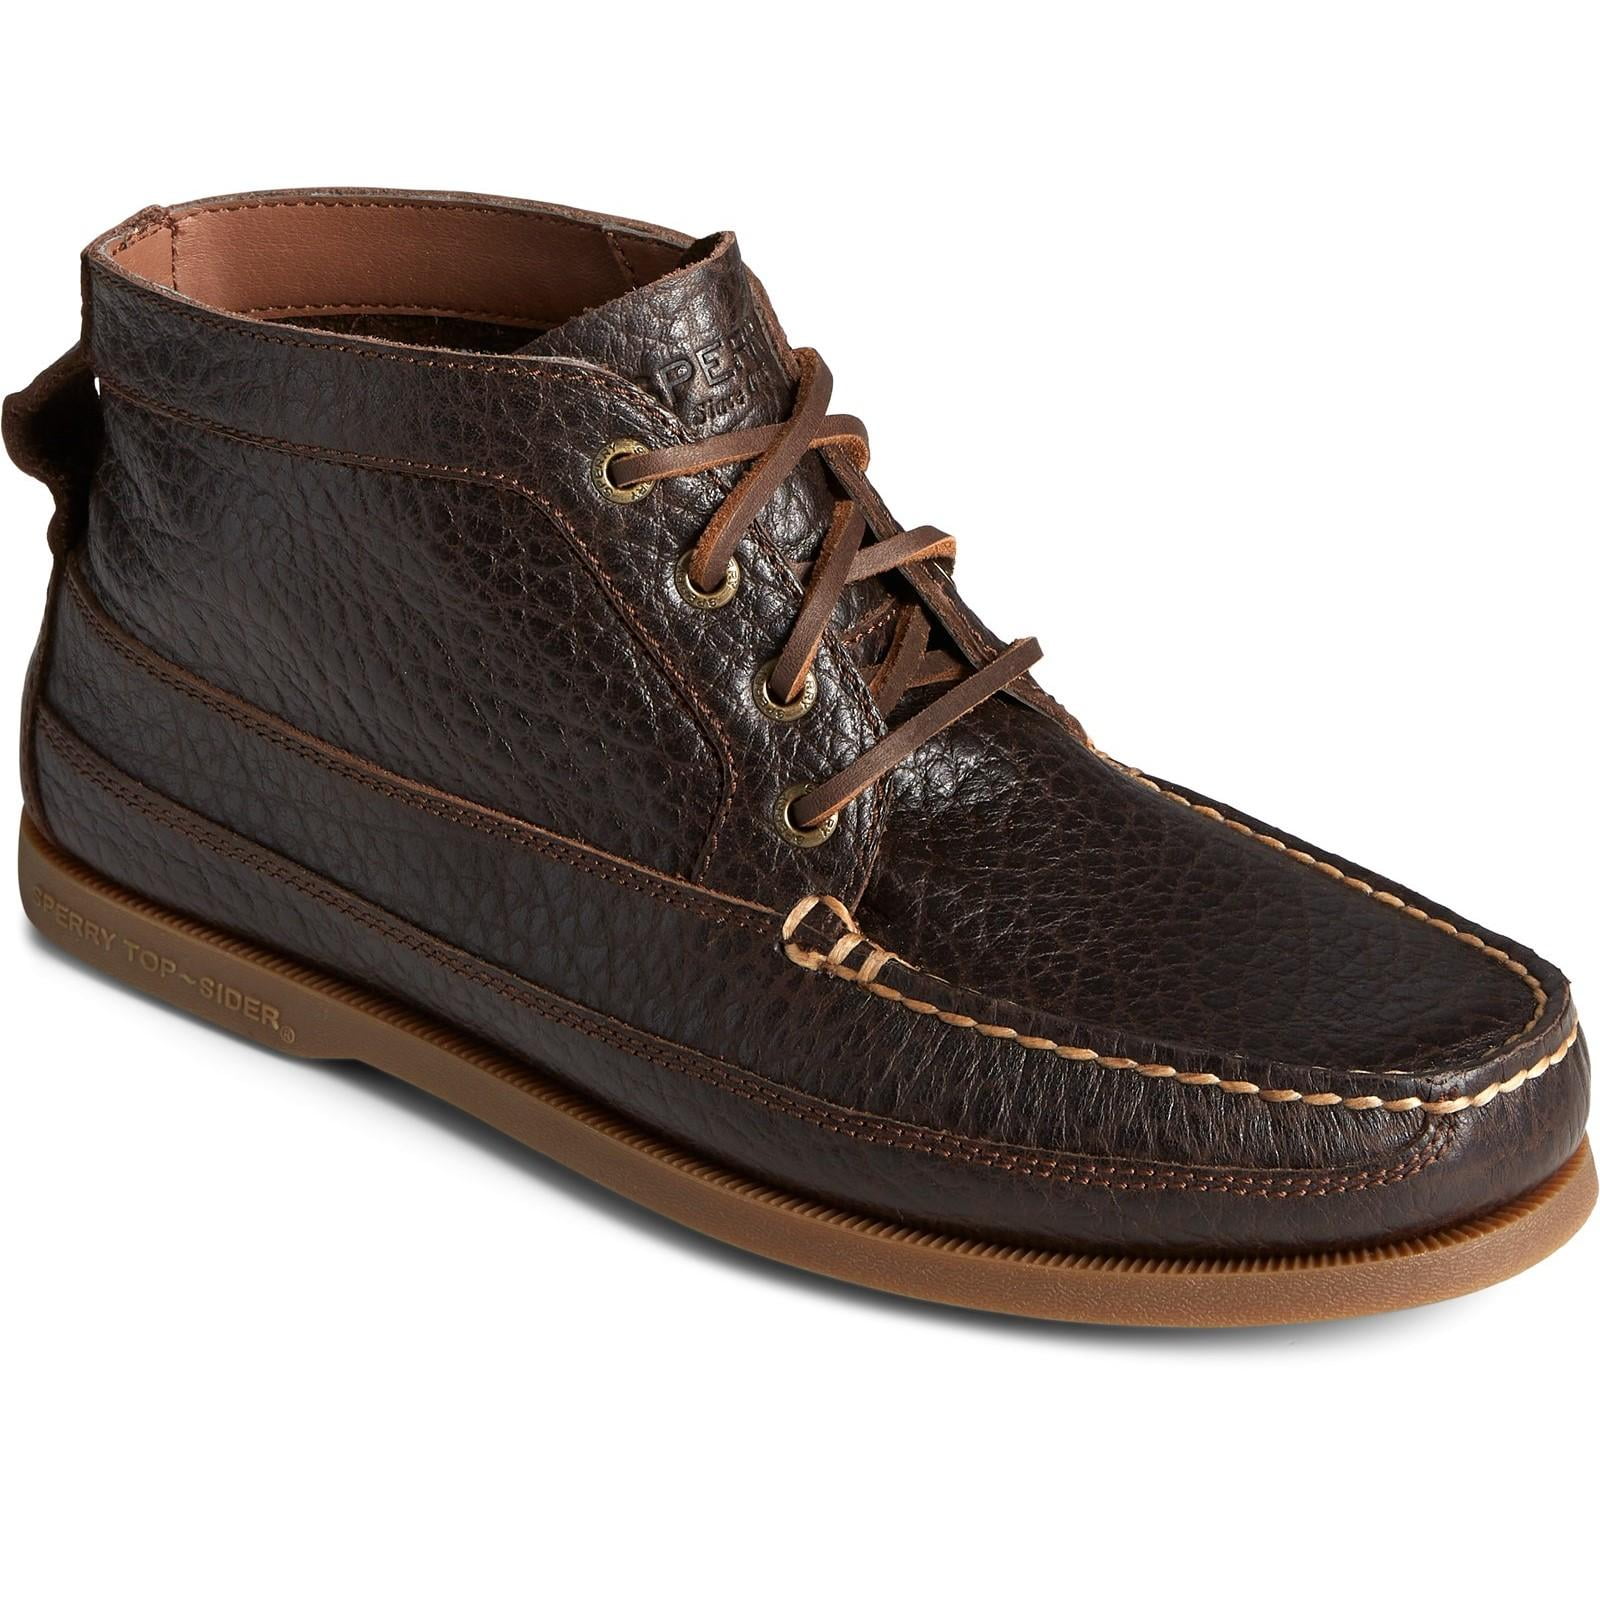 Hush Puppies Mens Authentic Original Boat Leather Chukka Boots ...